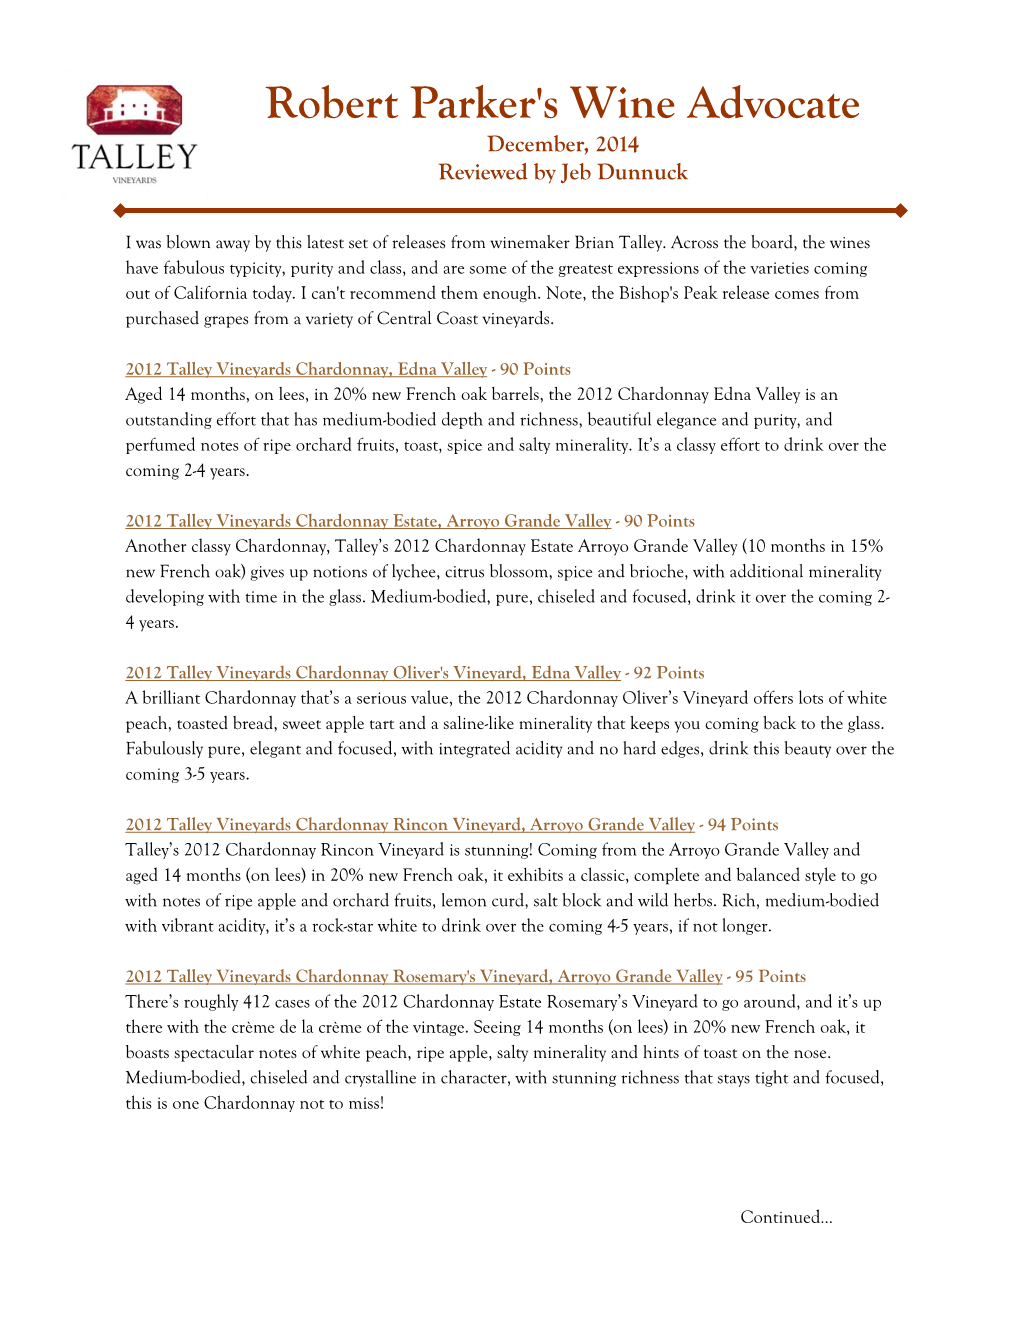 Robert Parker's Wine Advocate December, 2014 Reviewed by Jeb Dunnuck